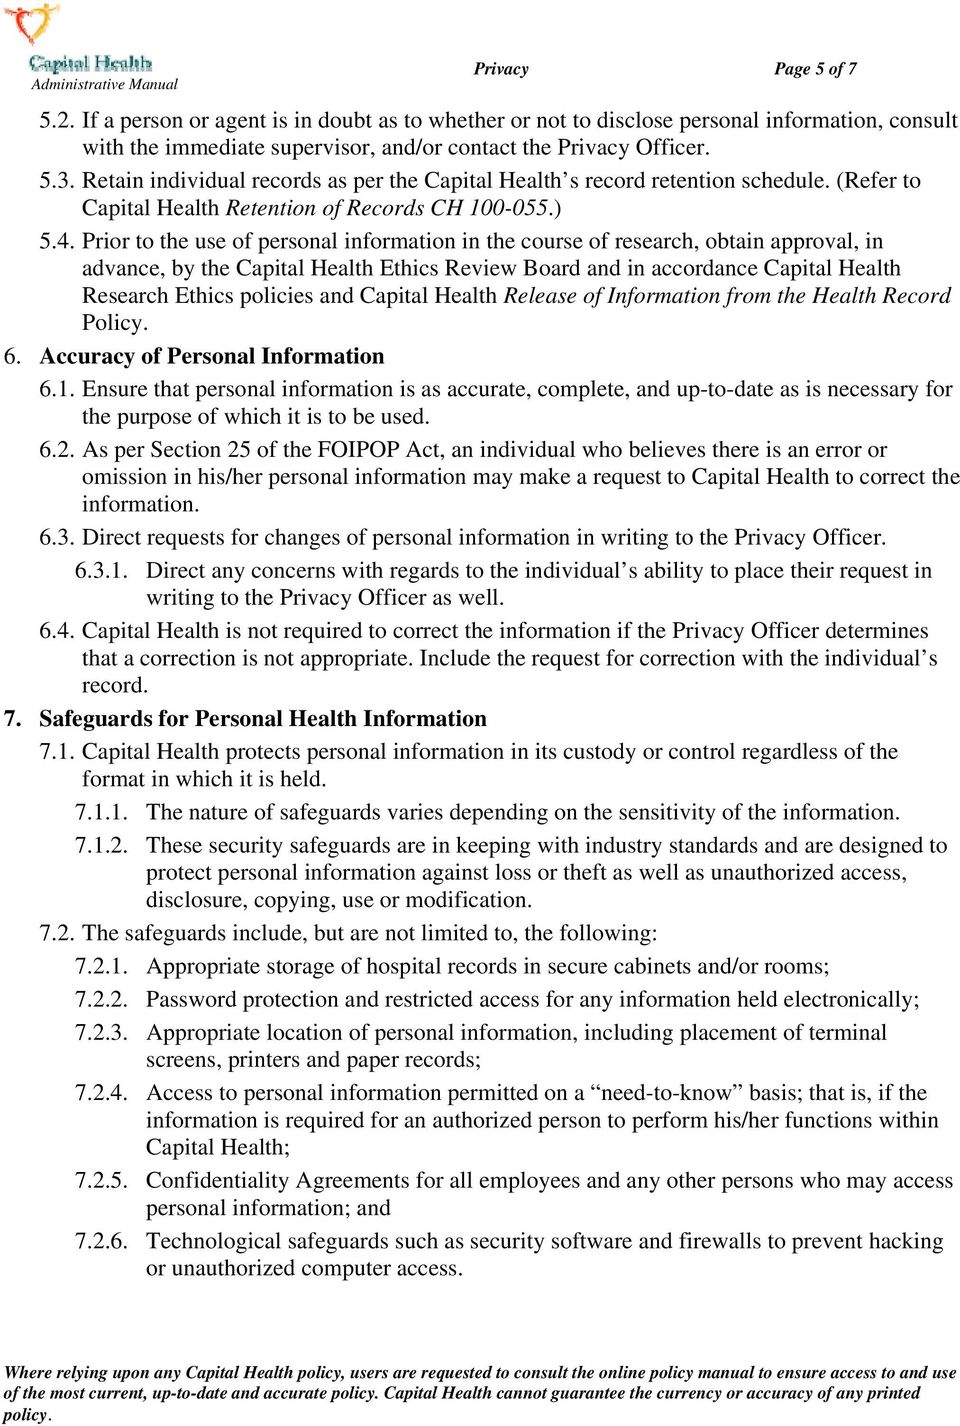 Prior to the use of personal information in the course of research, obtain approval, in advance, by the Capital Health Ethics Review Board and in accordance Capital Health Research Ethics policies